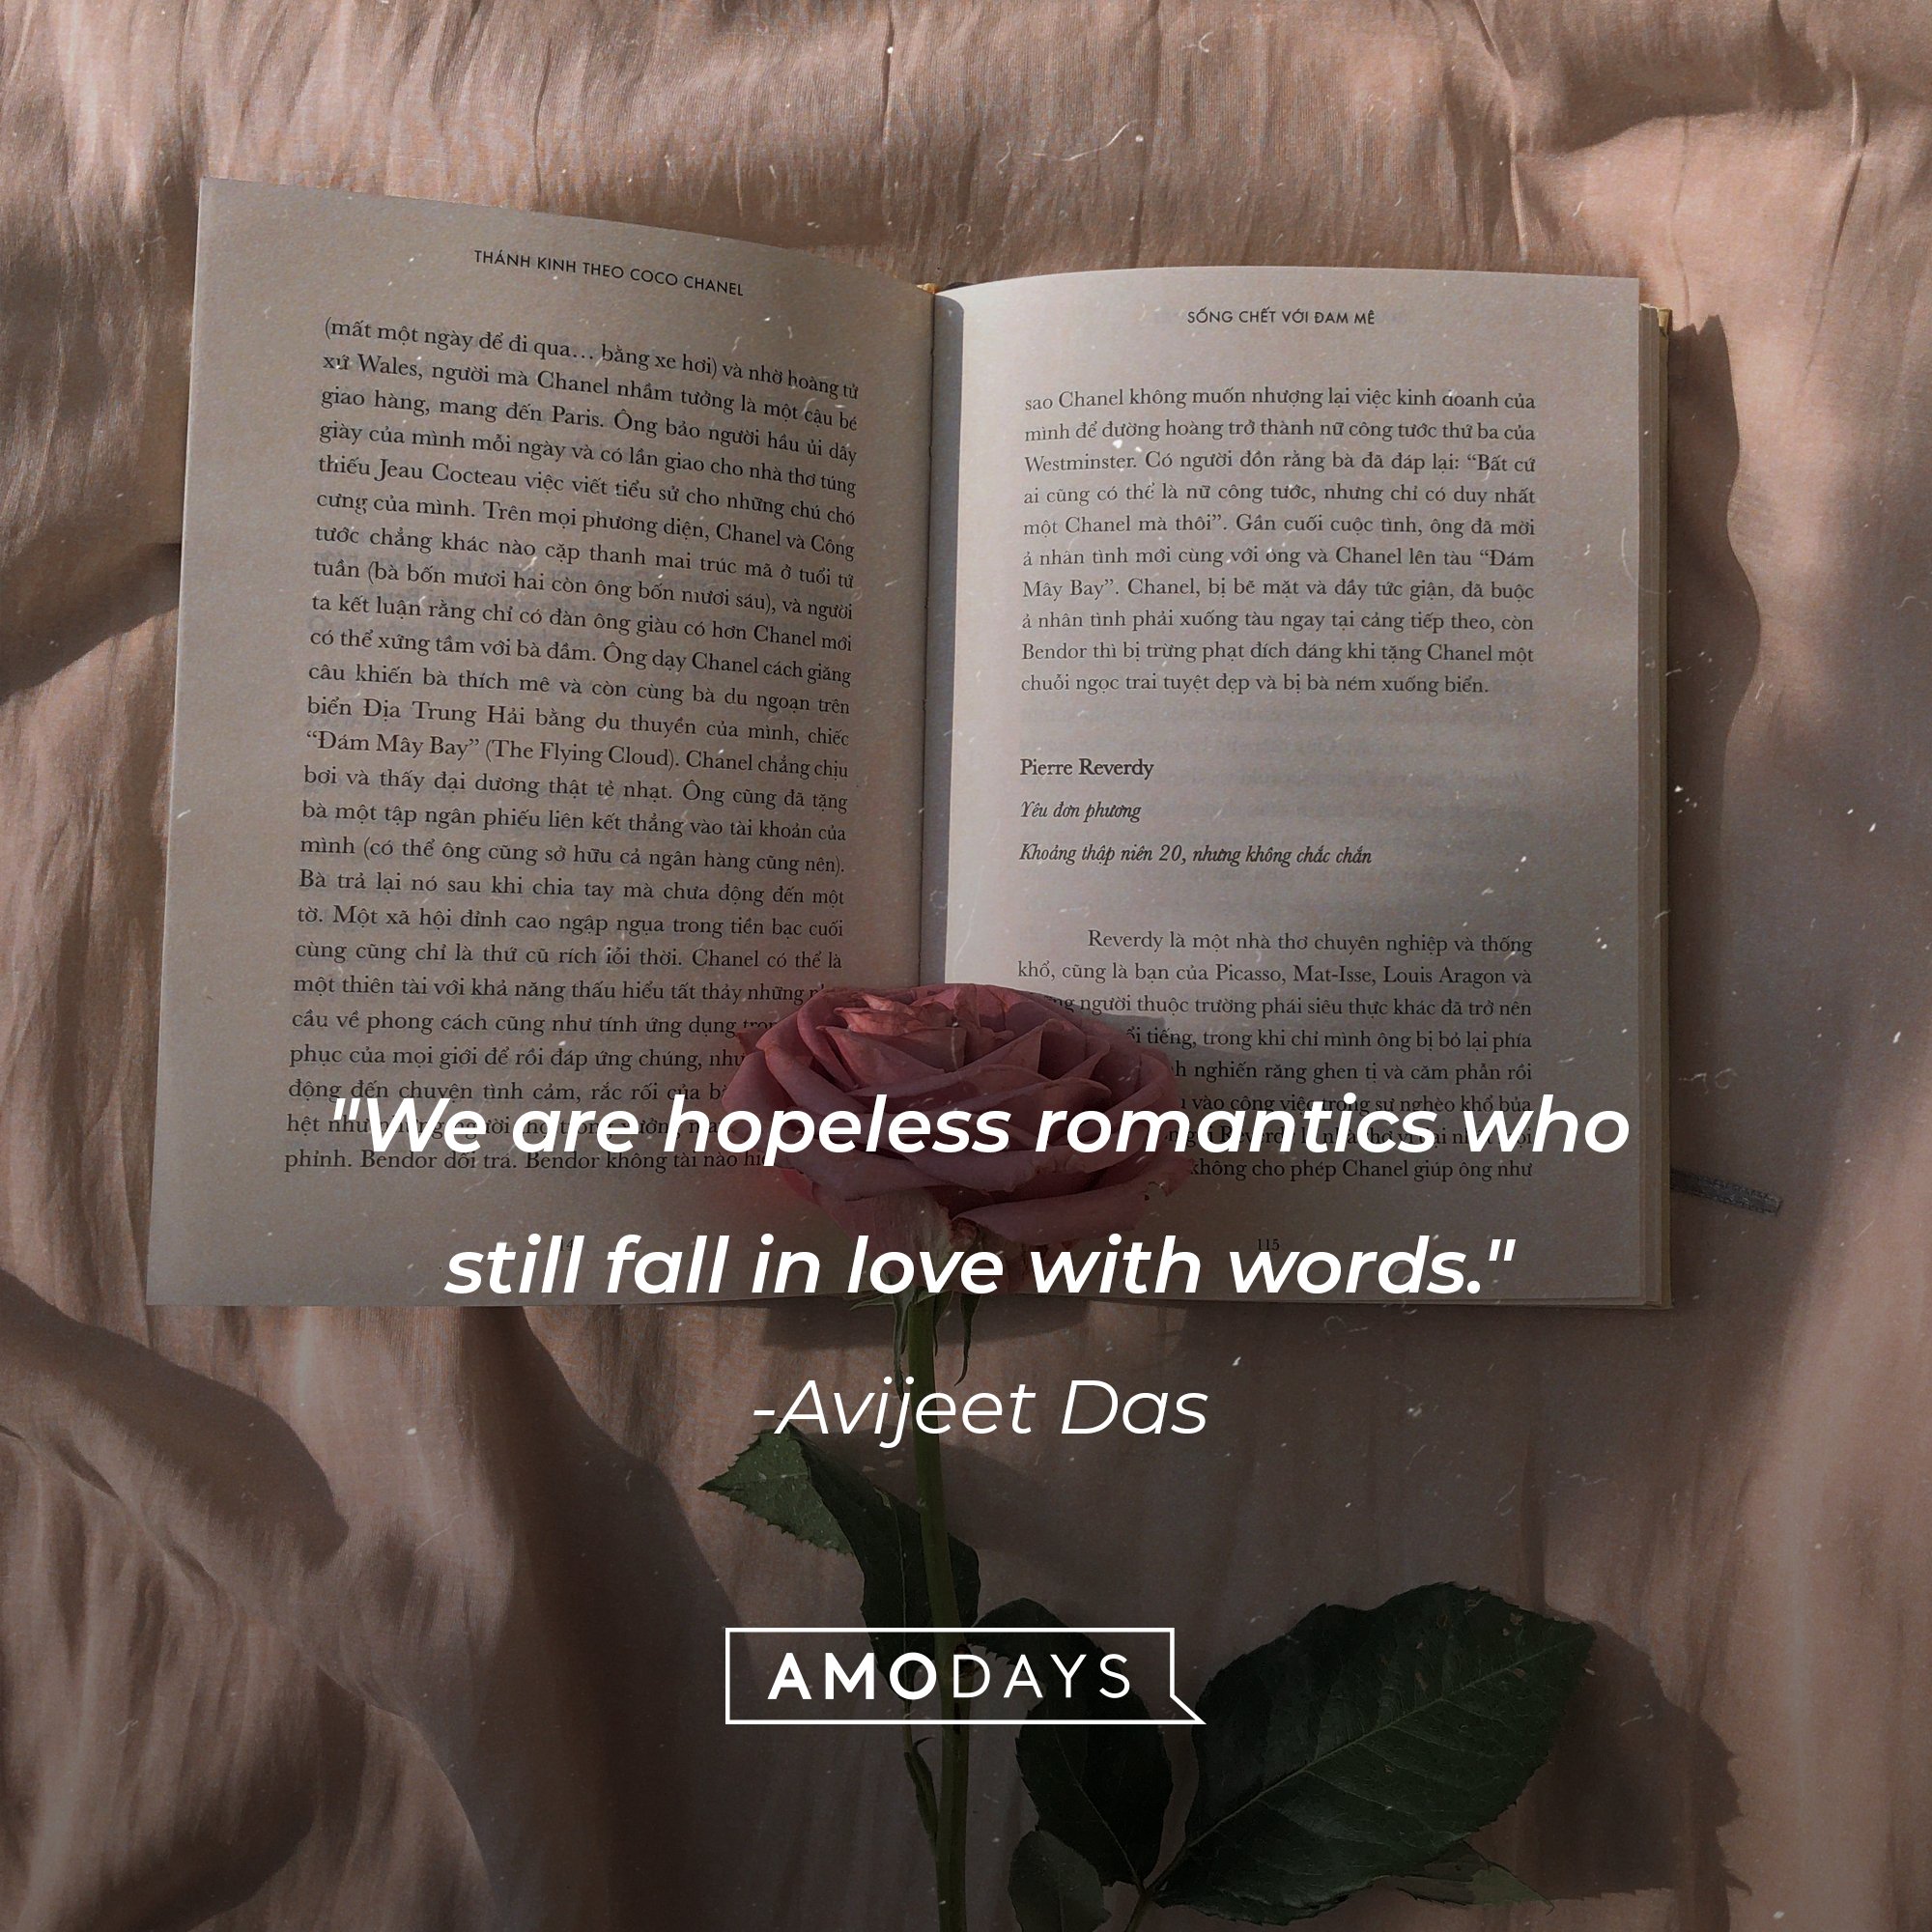 Avijeet Das’ quote: "We are hopeless romantics who still fall in love with words."  | Image: AmoDays